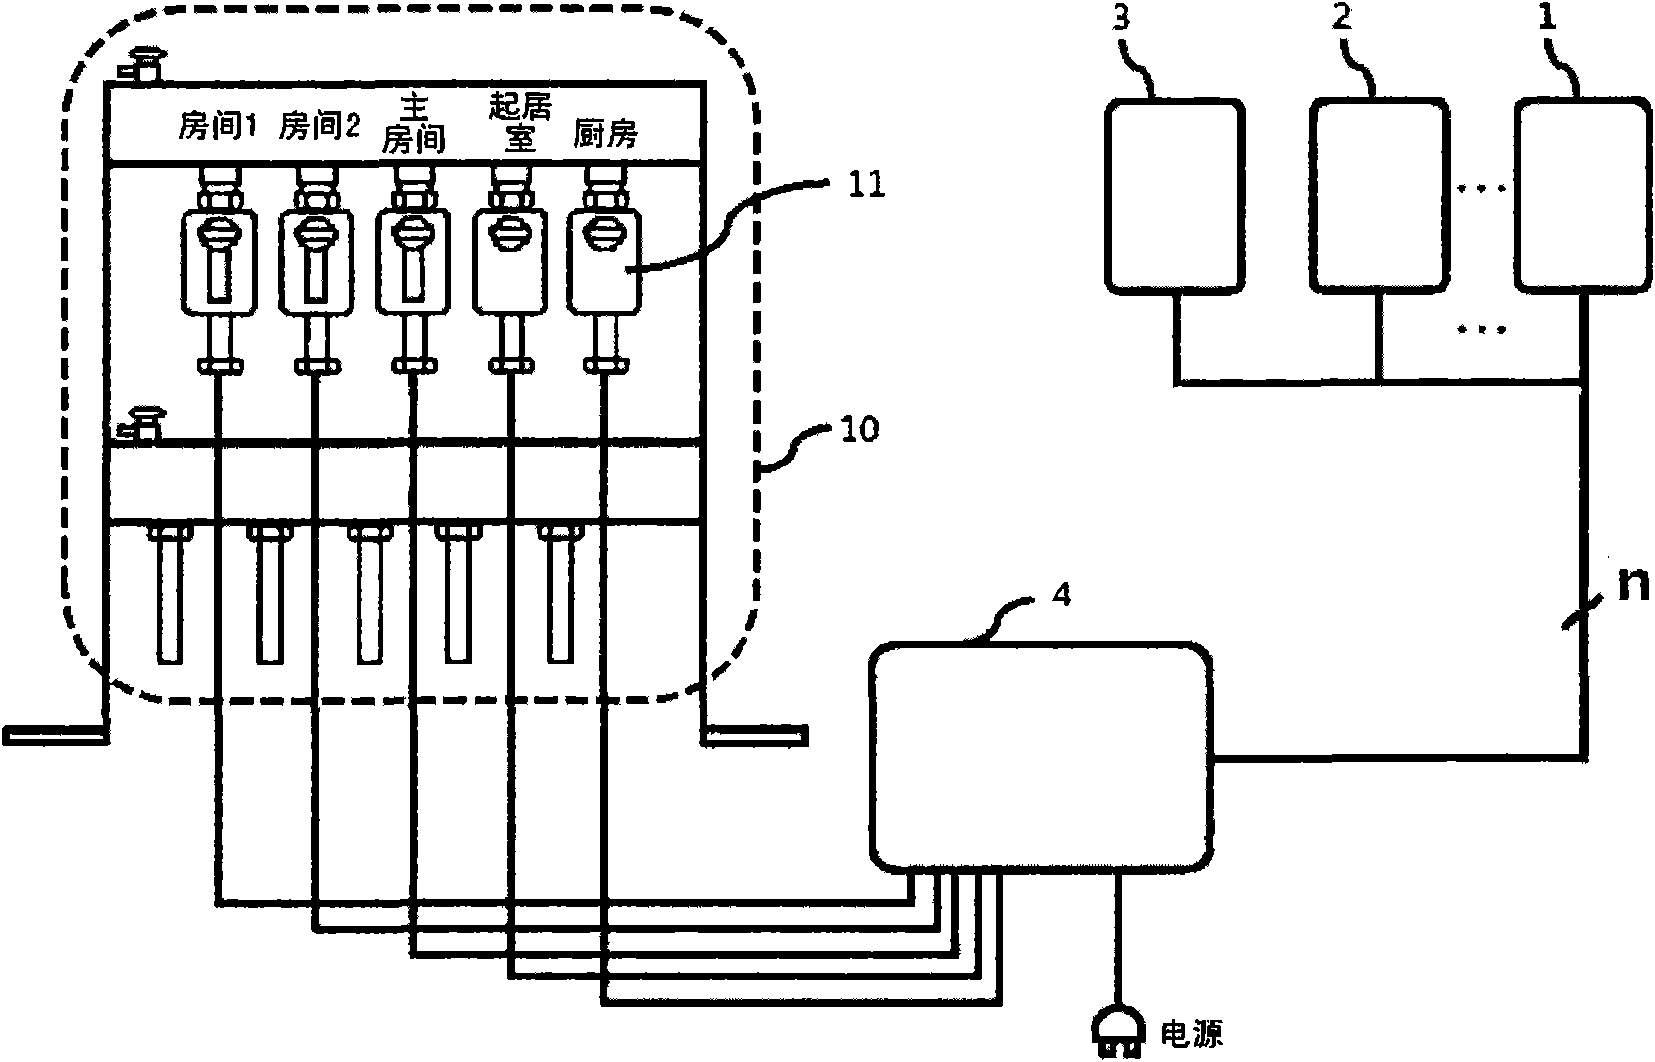 The heating control system and method for saving energy